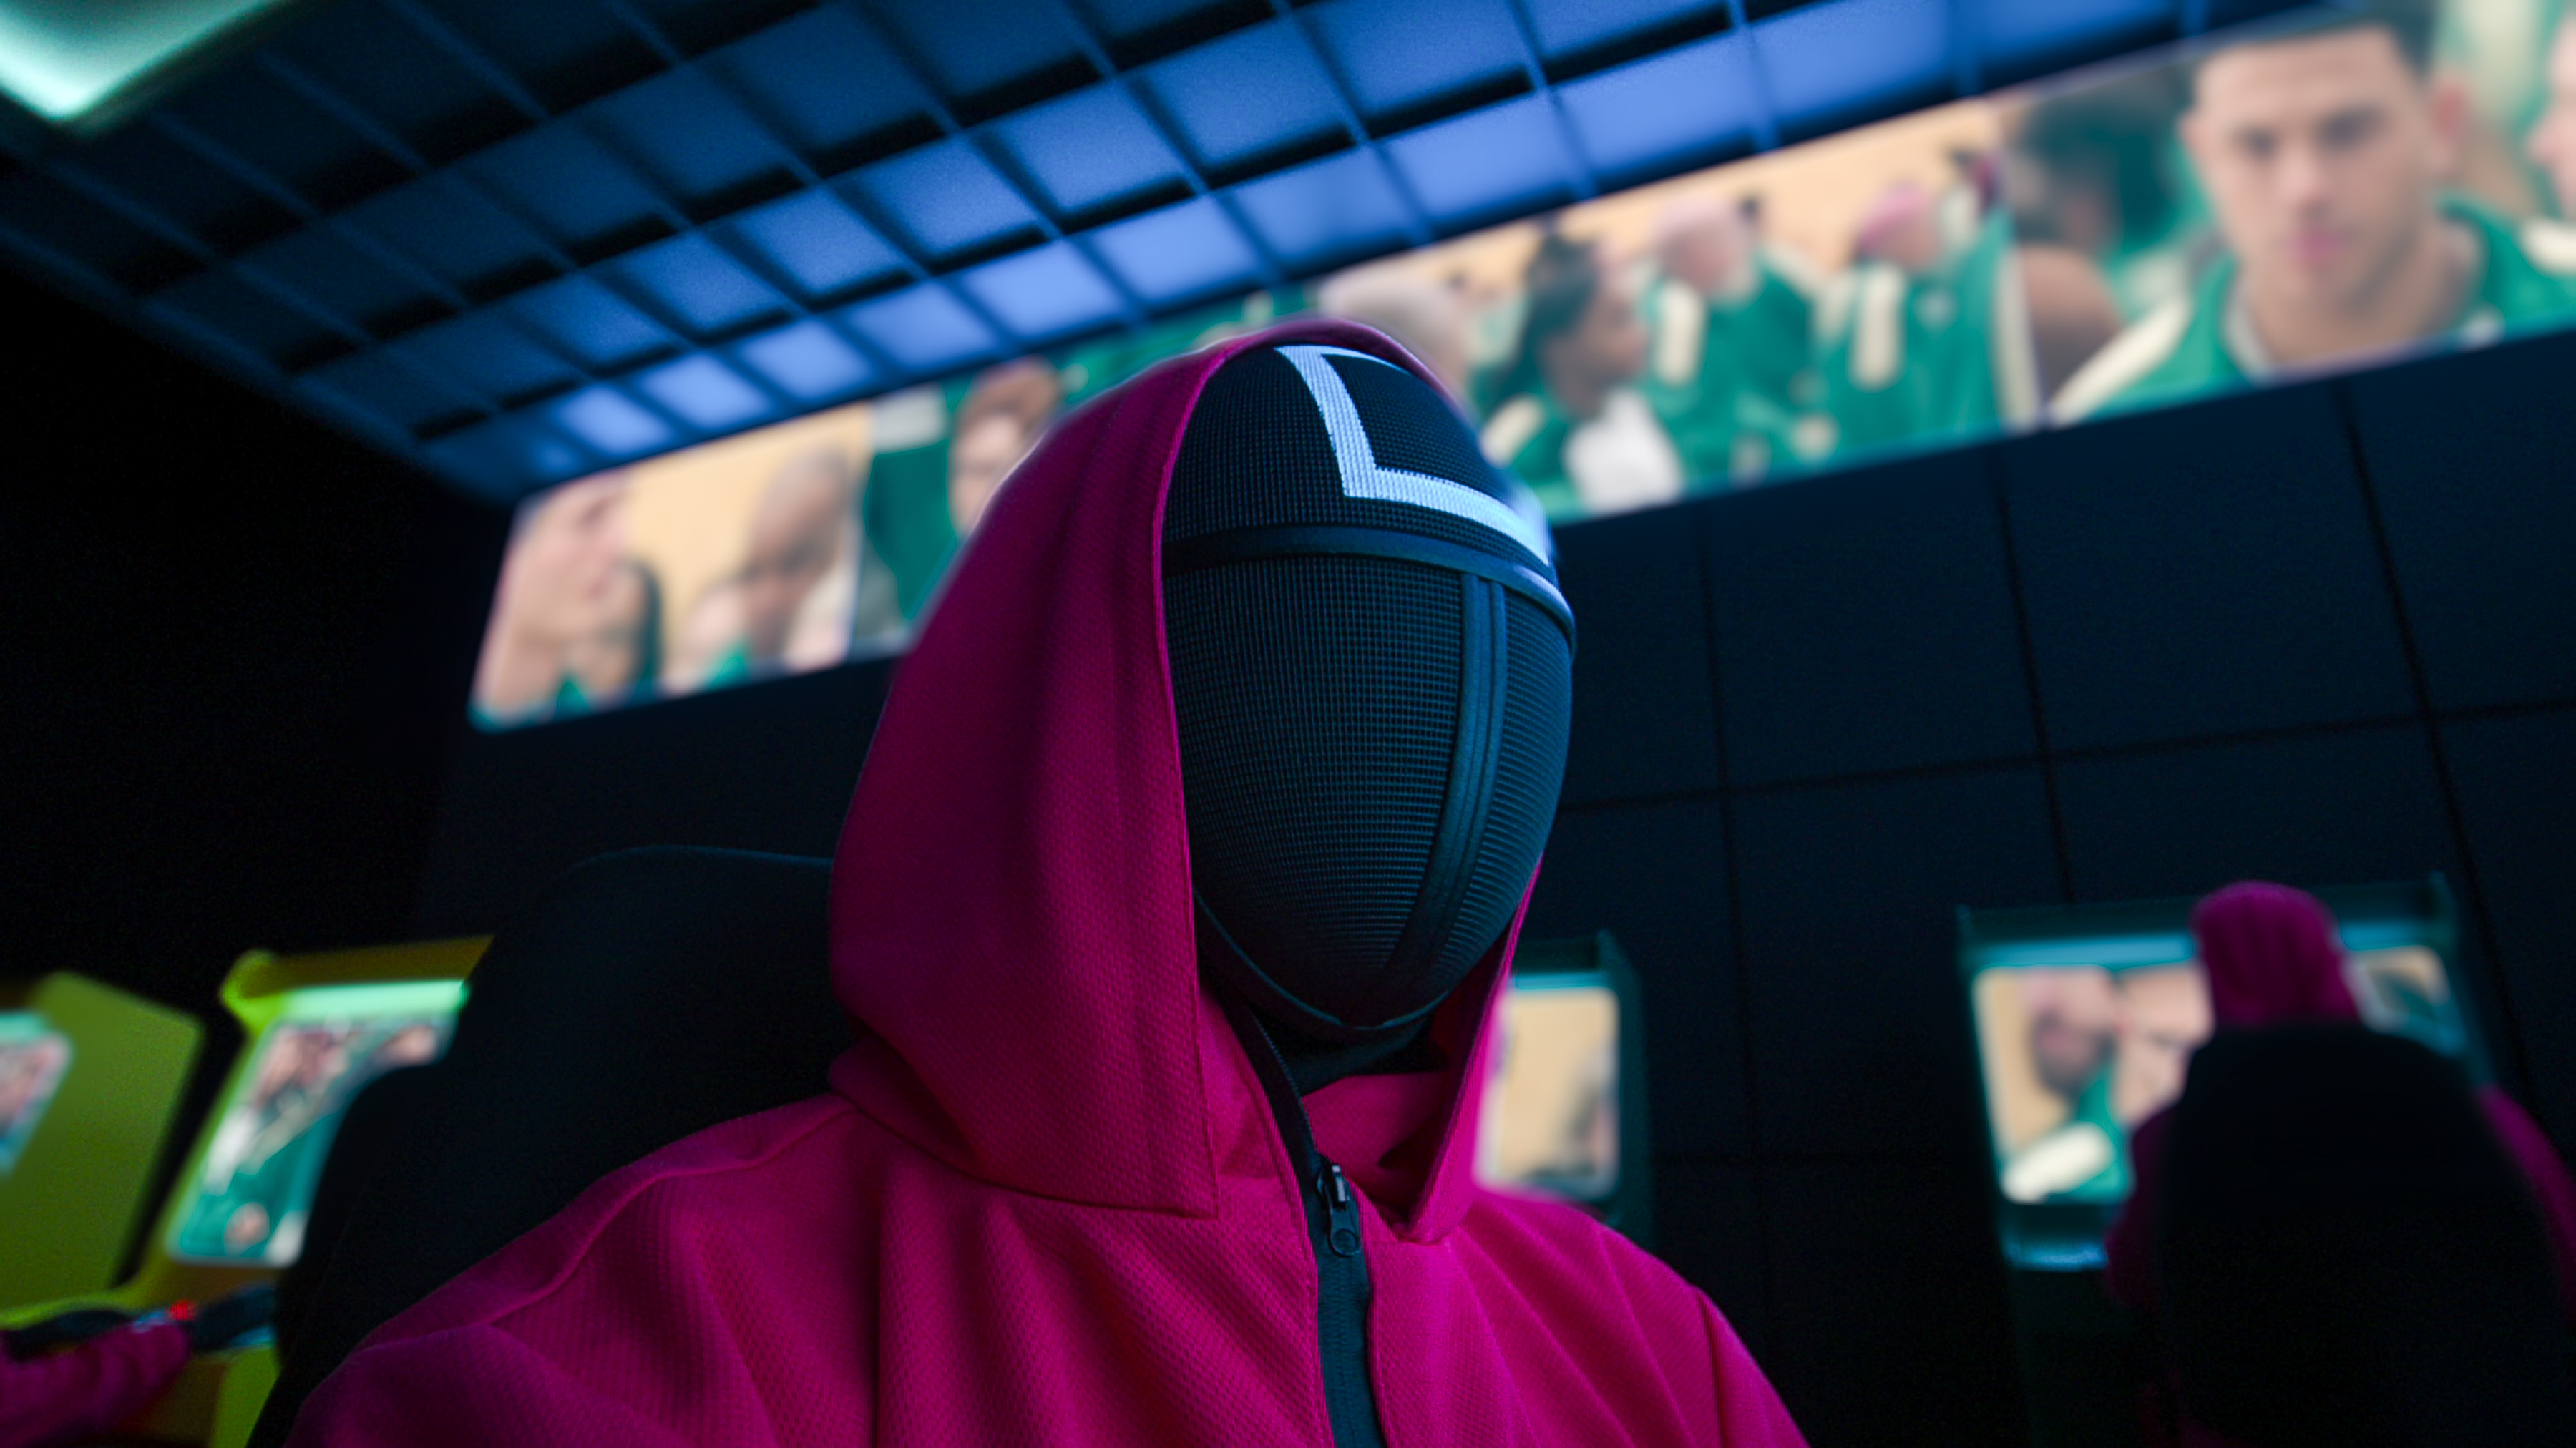 A person wearing a full-face mask and hoodie.